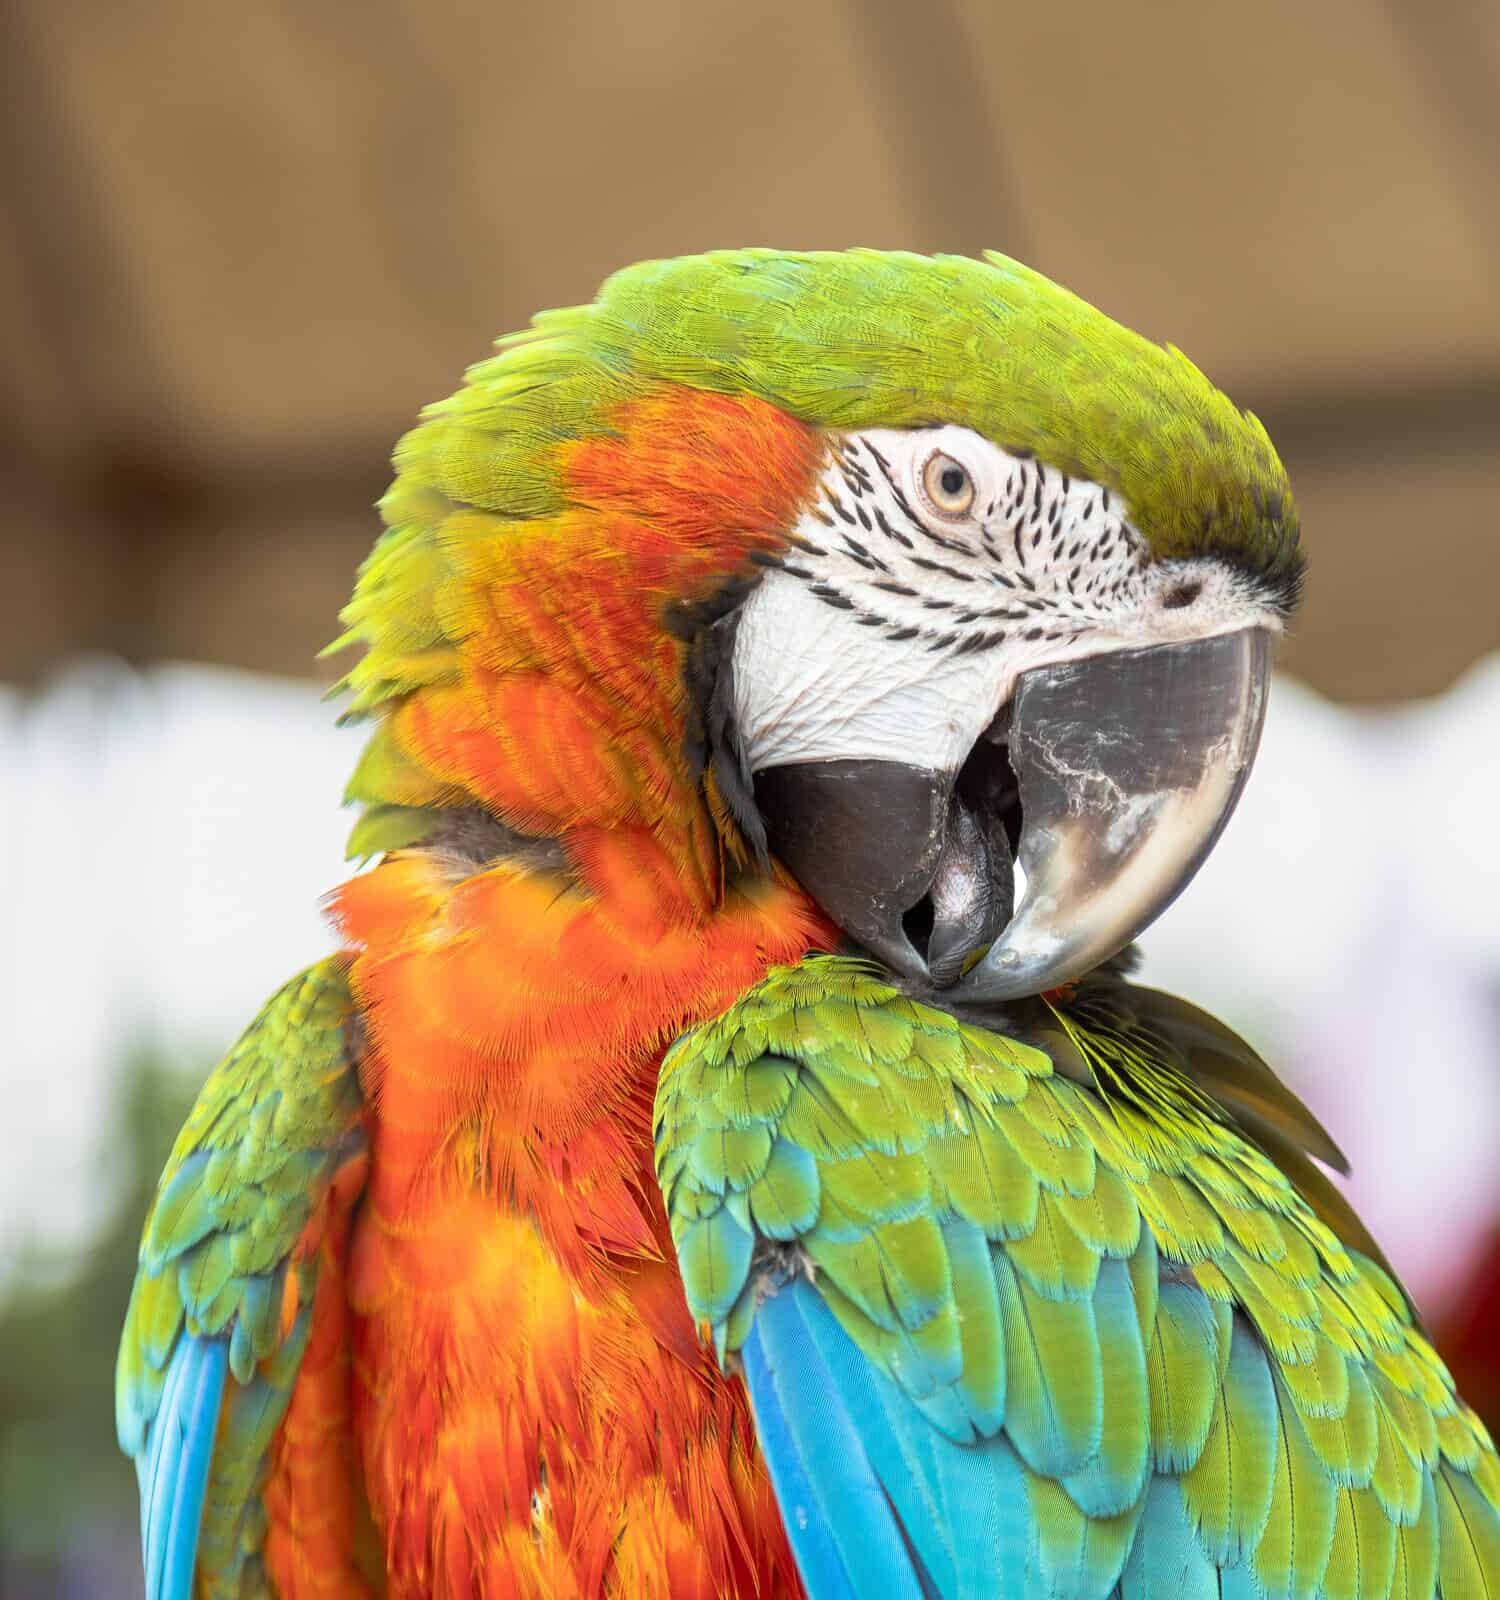 The Catalina Macaw is a first generation hybrid macaw.